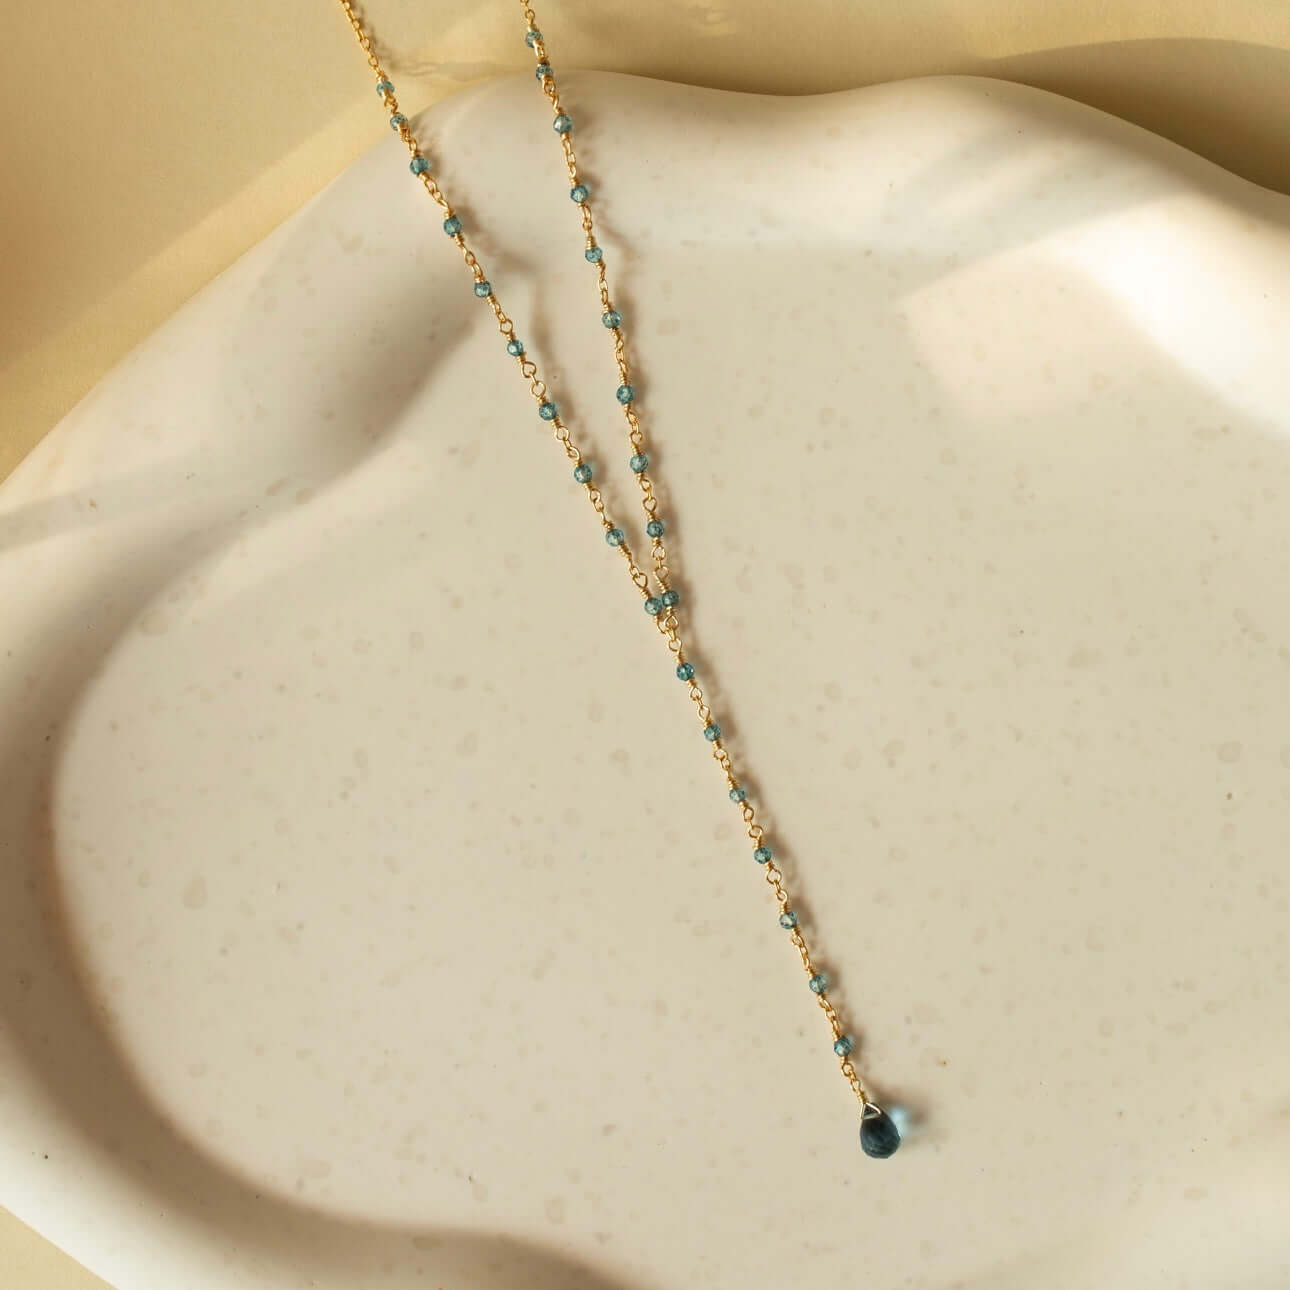 Lolite necklace—a simple and elegant adornment with calming blue hues.